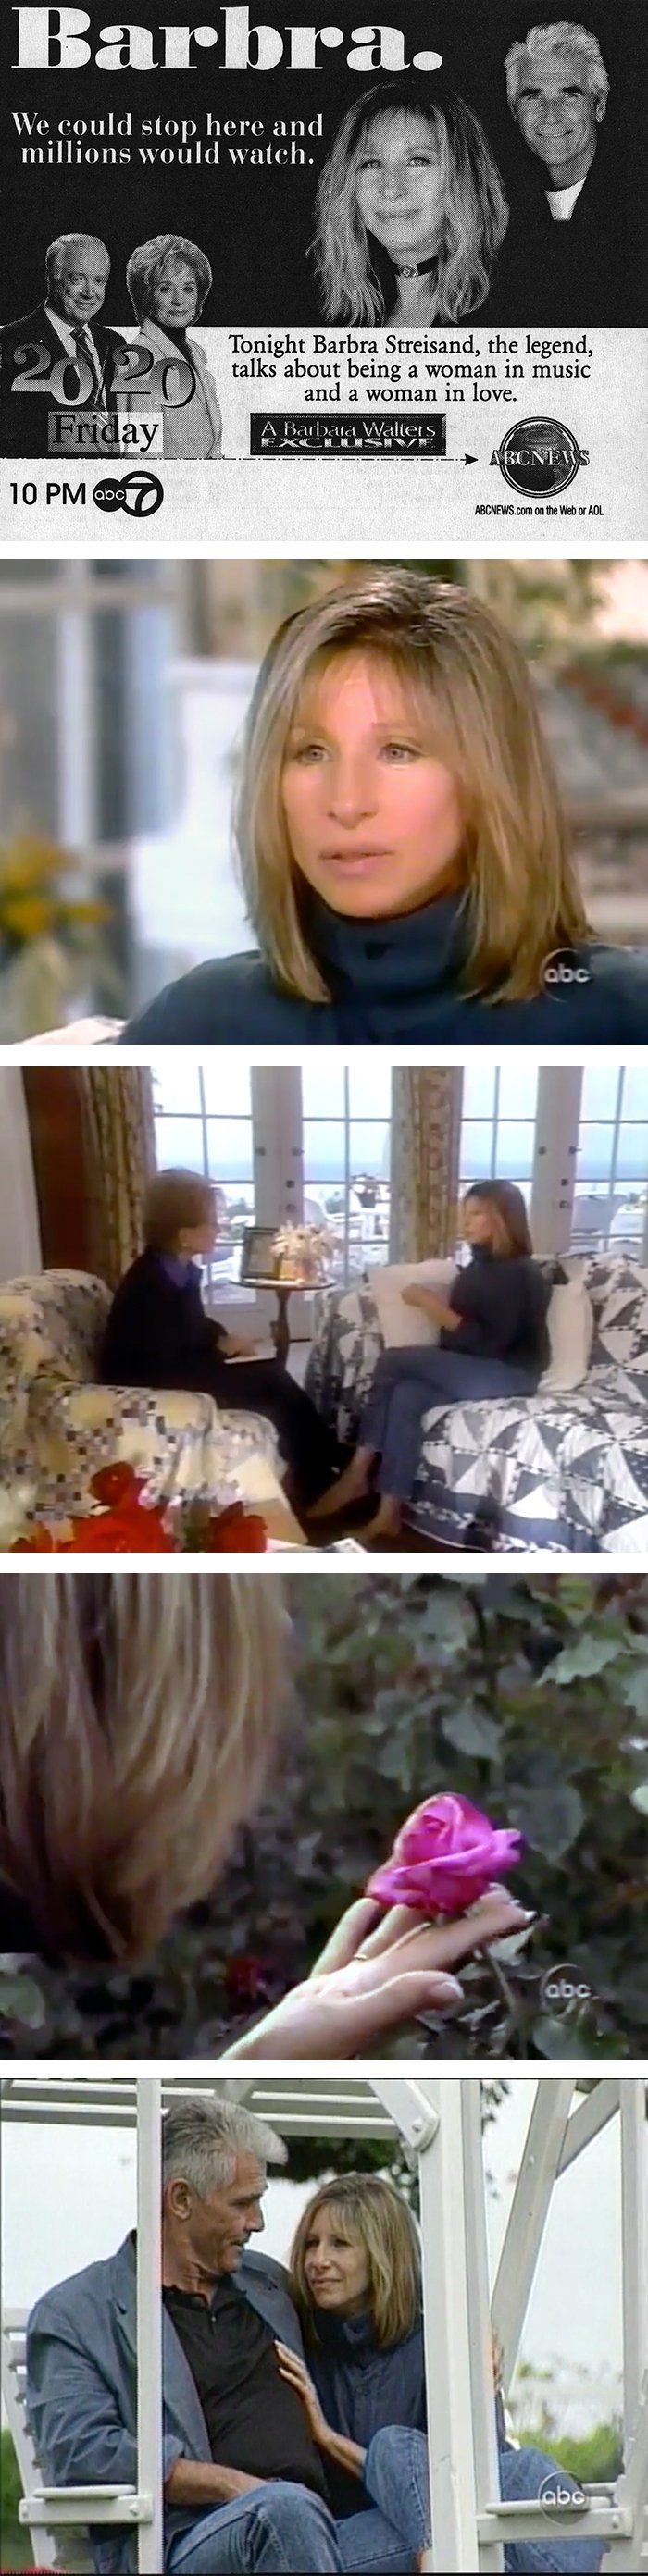 Scenes from Barbara Walters 1997 interview with Barbra Streisand and James Brolin.